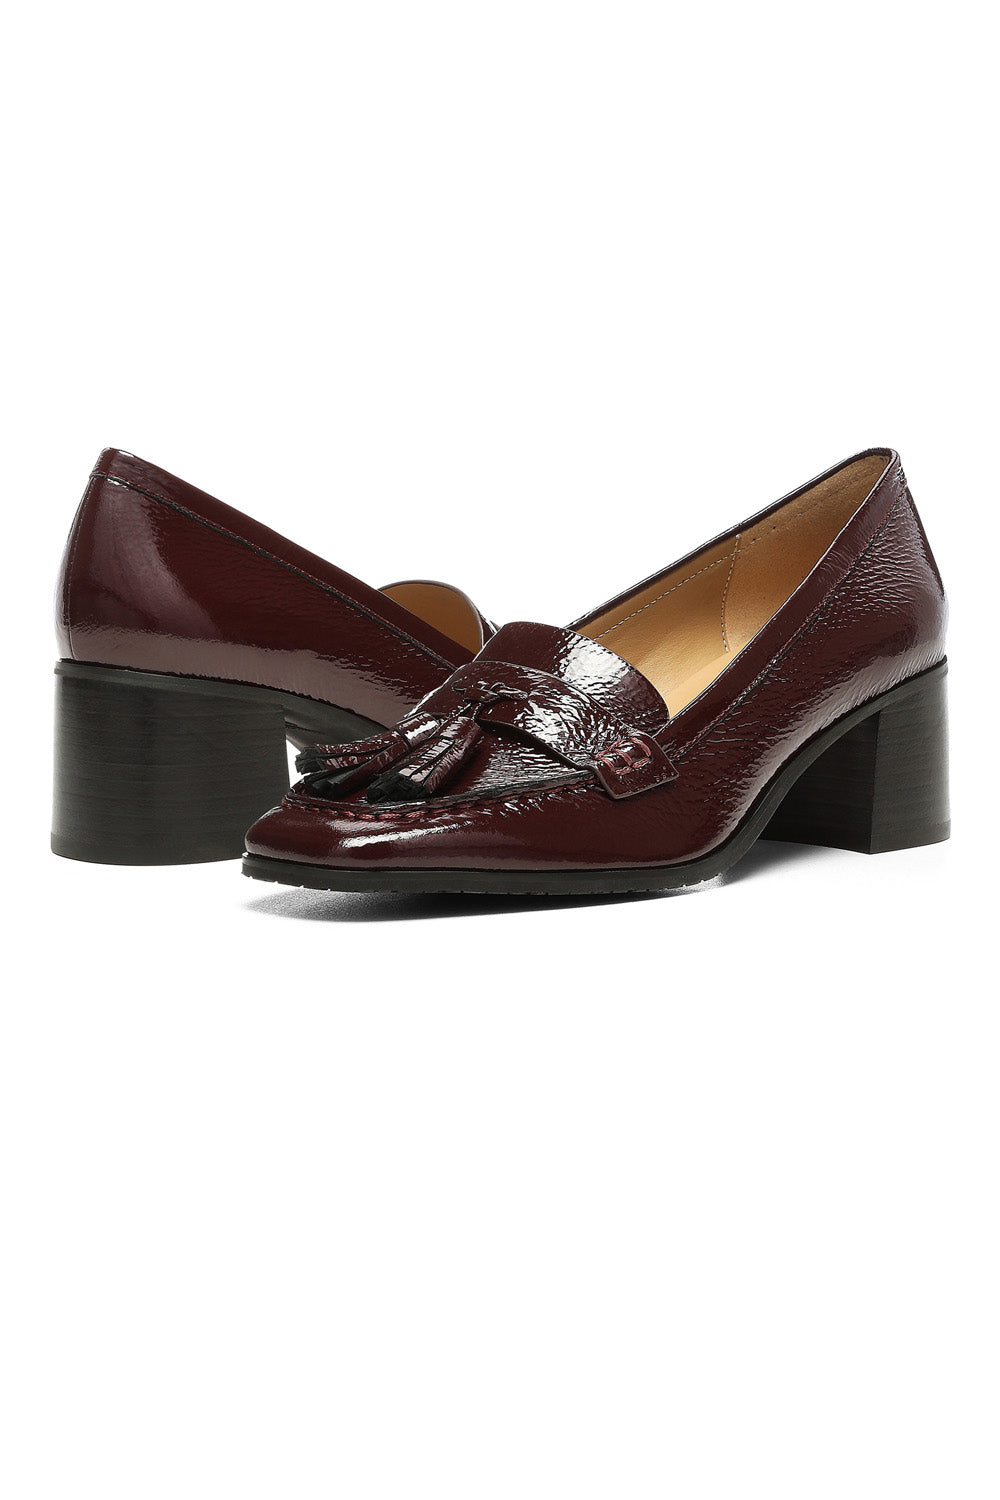 NYDJ Dexter Loafers In Patent Leather - Wine